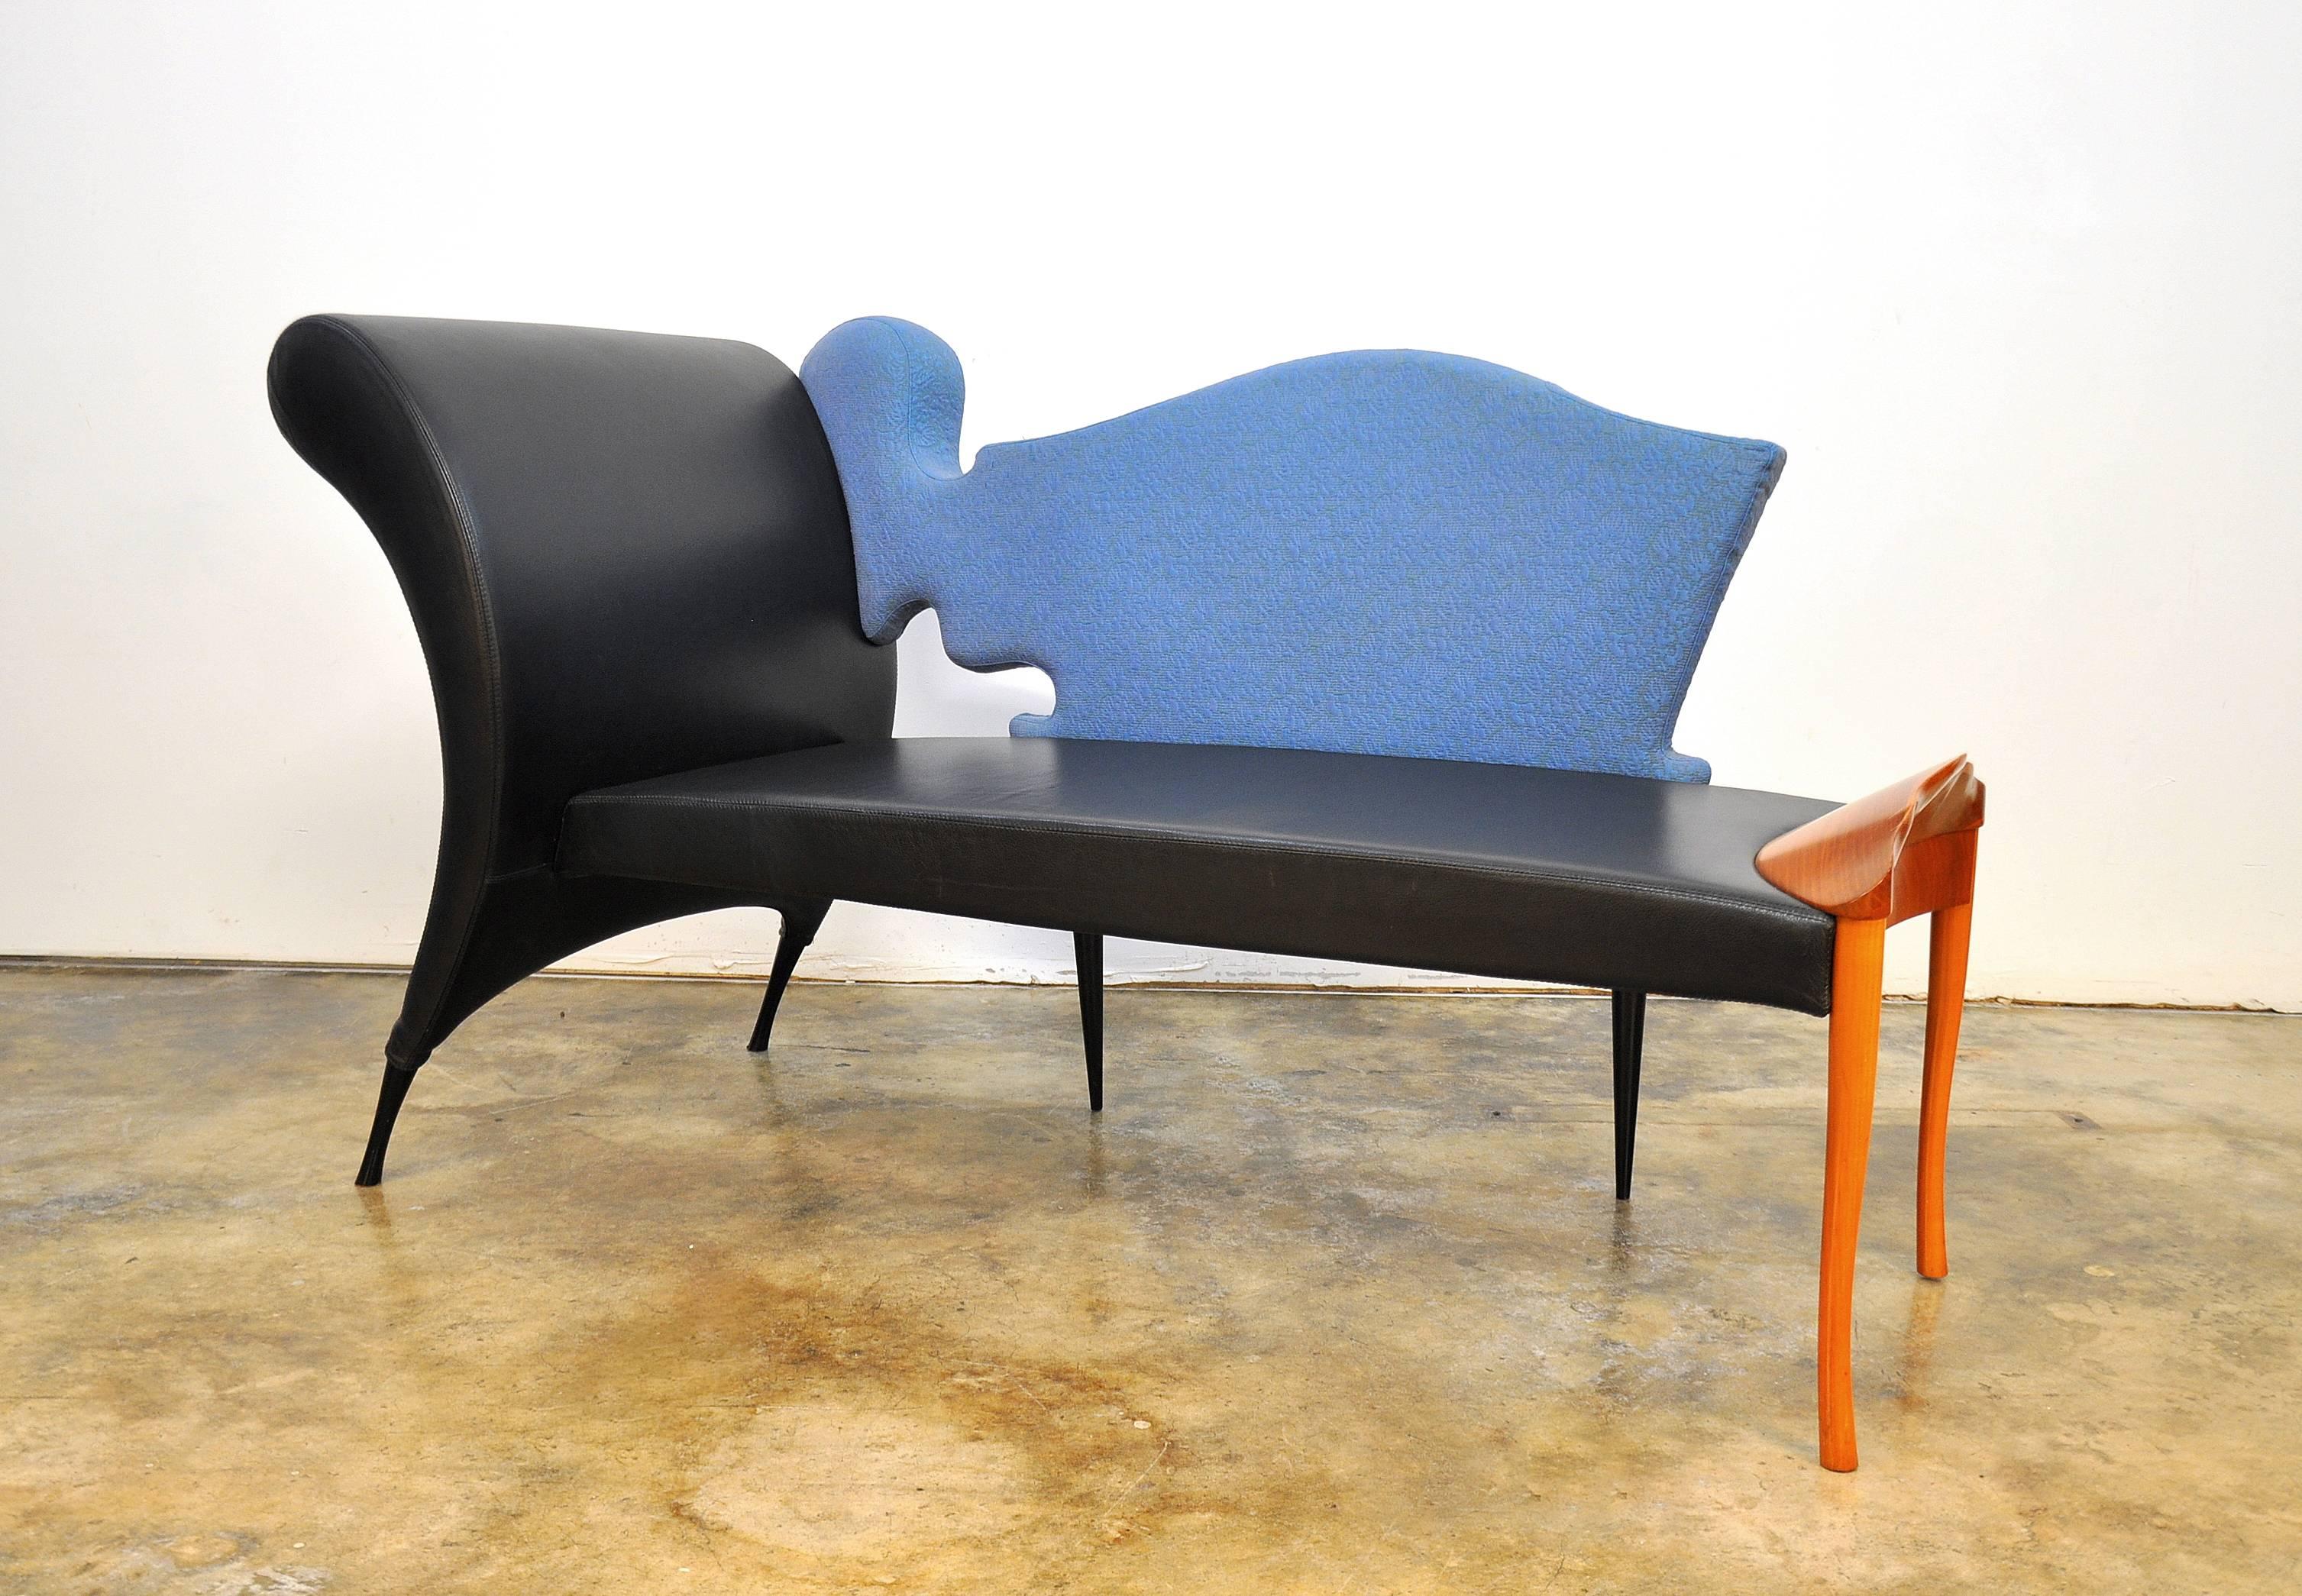 The Czech architect, designer and artist Borek Sipek's Postmodernist lounge, with its striking curves in black leather and rich upholstery, juxtaposed with sculpted cherrywood, exemplifies the unique style he is renowned for. In this creation from